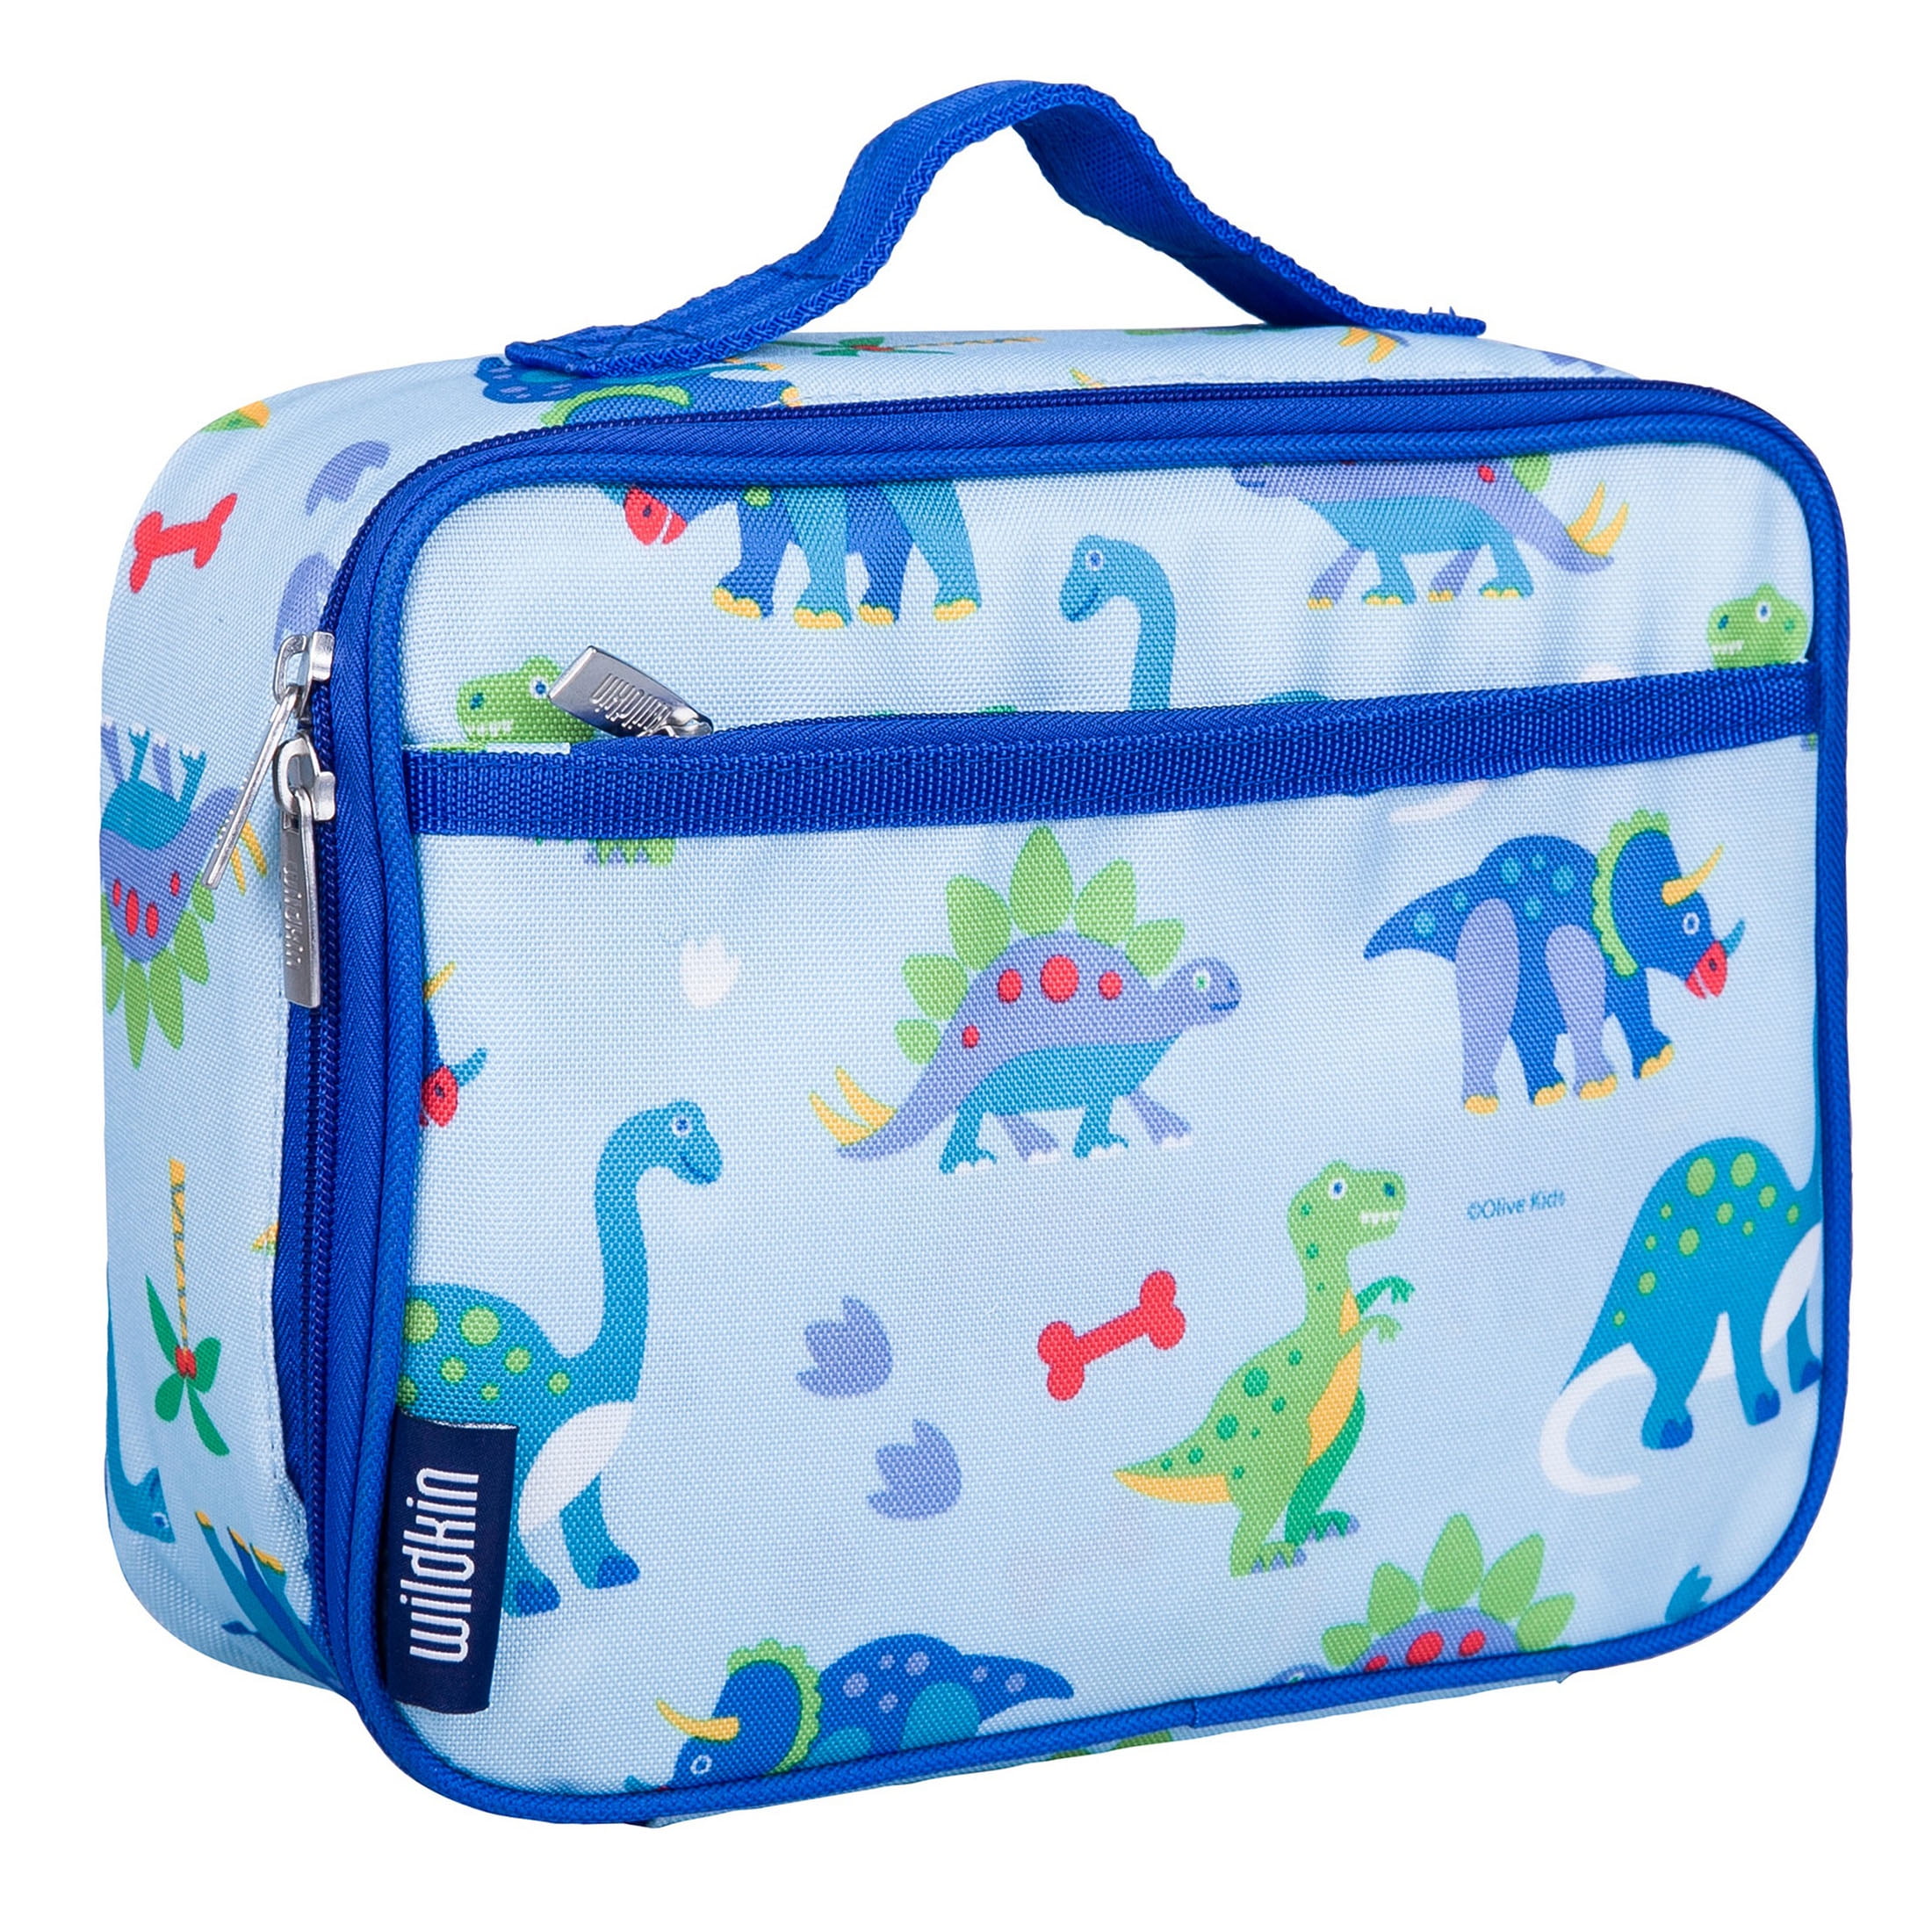 OREZI Cute Dino Lunch Bag for Kids,Waterproof Insulated Neoprene Lunch Tote Soft Bento Cooler Thermal Bags for School Work Pacnic Outdoor